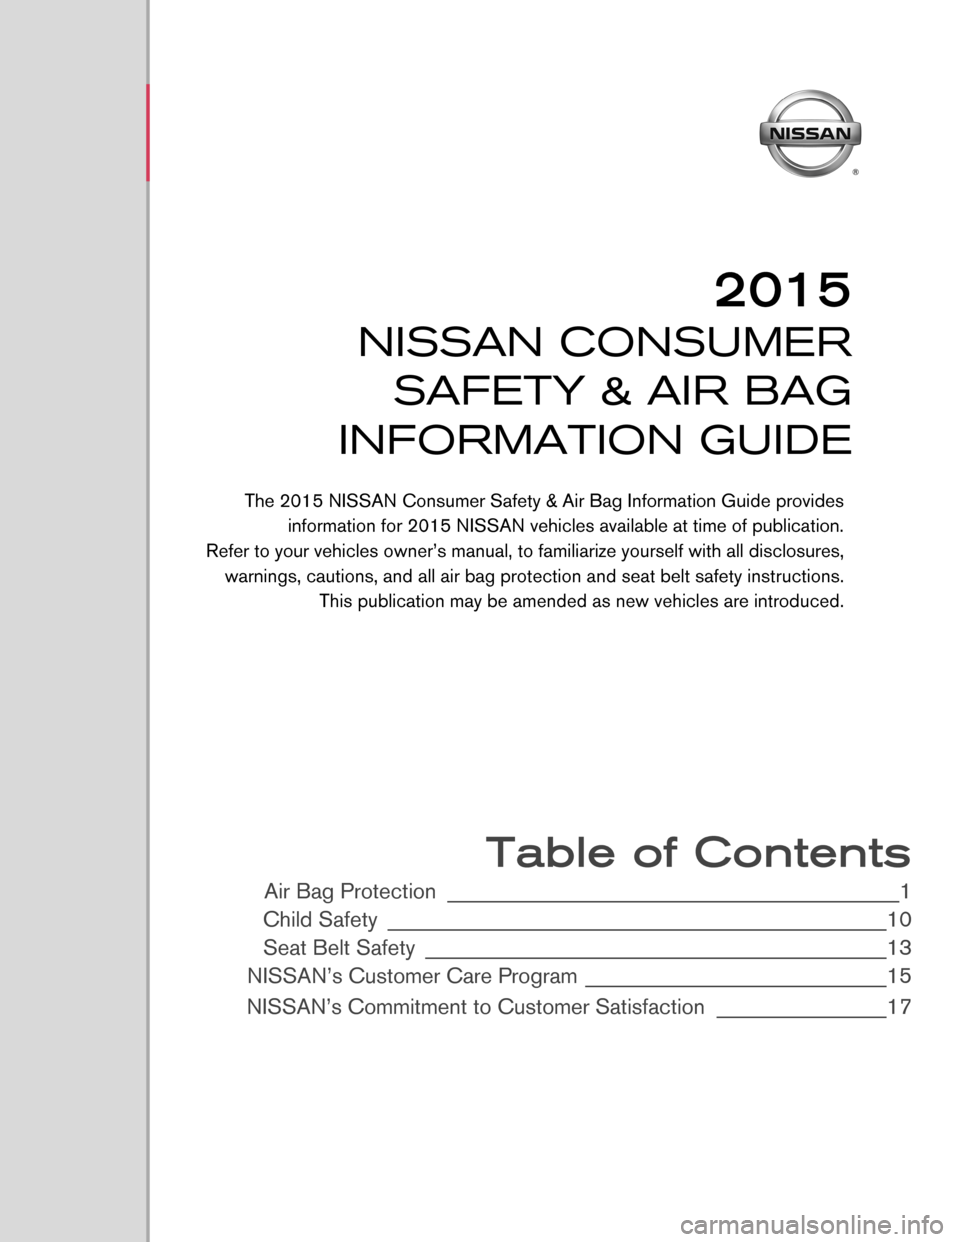 NISSAN ROGUE 2015 2.G Consumer Safety Air Bag Information Guide  
 
 
 
 
 
 
 
 
 
 
 
 
 
 
 
 
 
 
 
 
 
 
 Table of Contents 
Air Bag Protection __________________\d__________________\d____________1 
Child \fafety _________________________\d__________________\